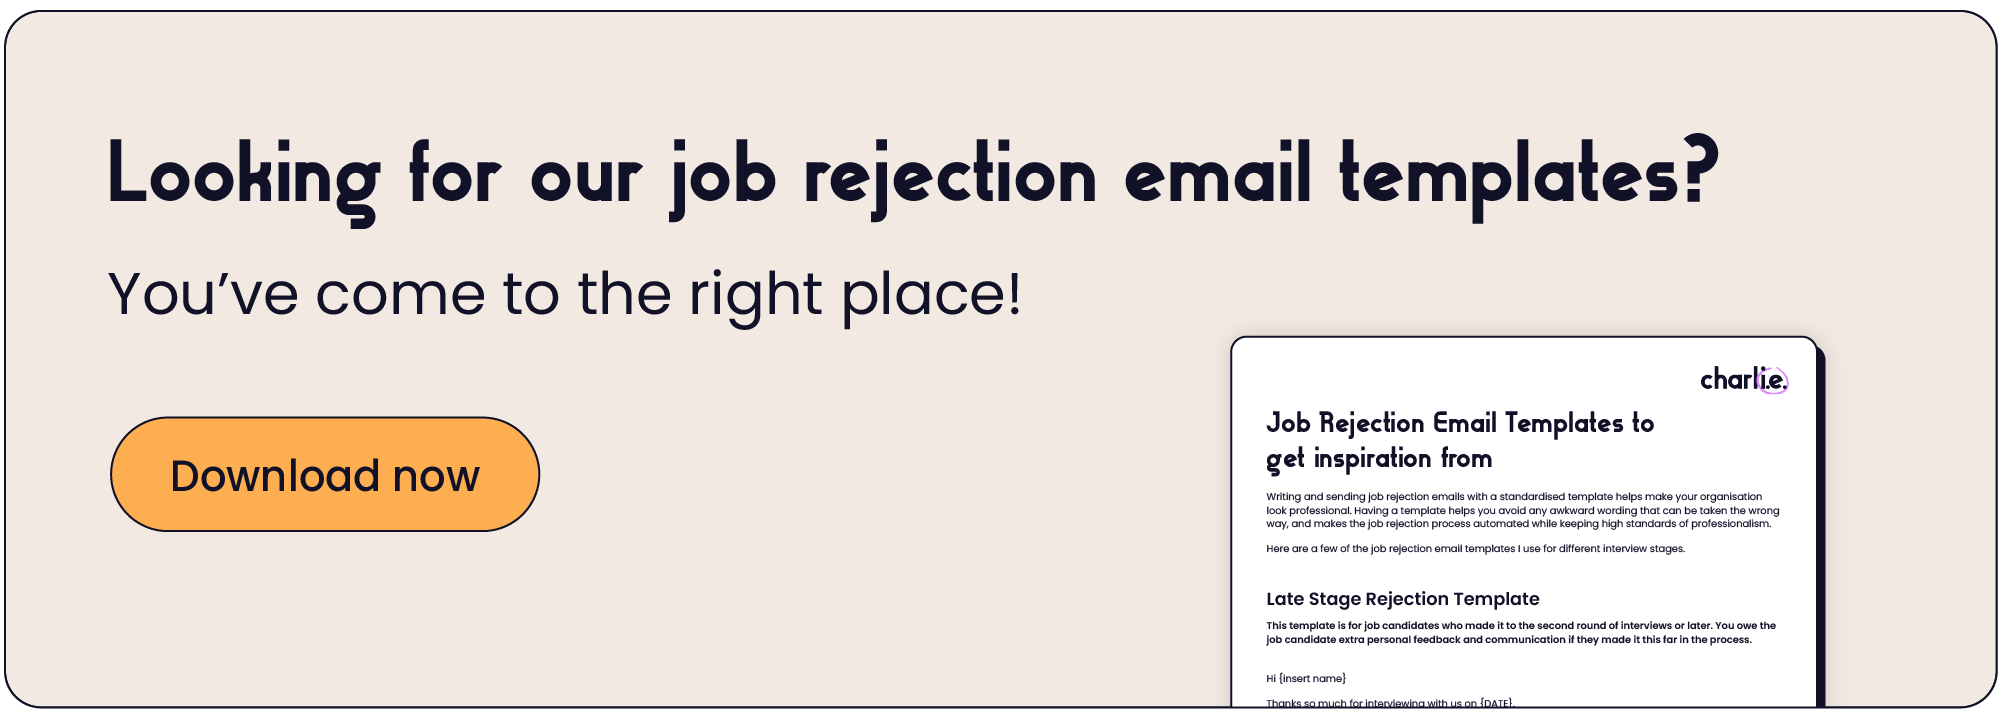 Download our job rejection email templates